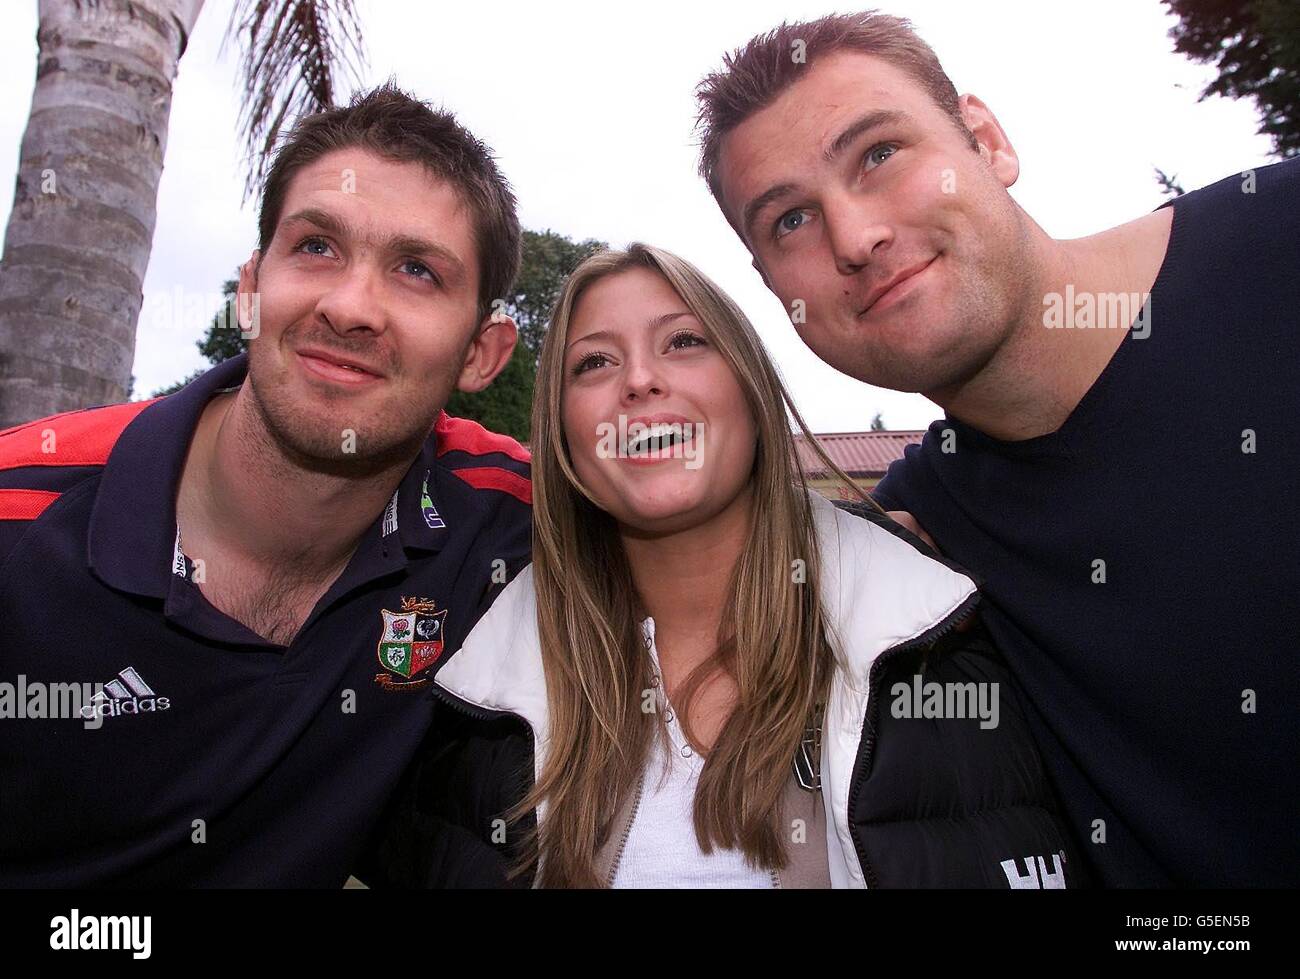 British and Irish Lions players Scott Murray (left) and Jeremy Davidson meet actress Holly Valance who plays Flick in the Neighbours television programme. The Lions paid a visit to the television set in Melbourne, Australia. * ahead of a second Test match against Australia at the Colonial Stadium, Melbourne. Stock Photo